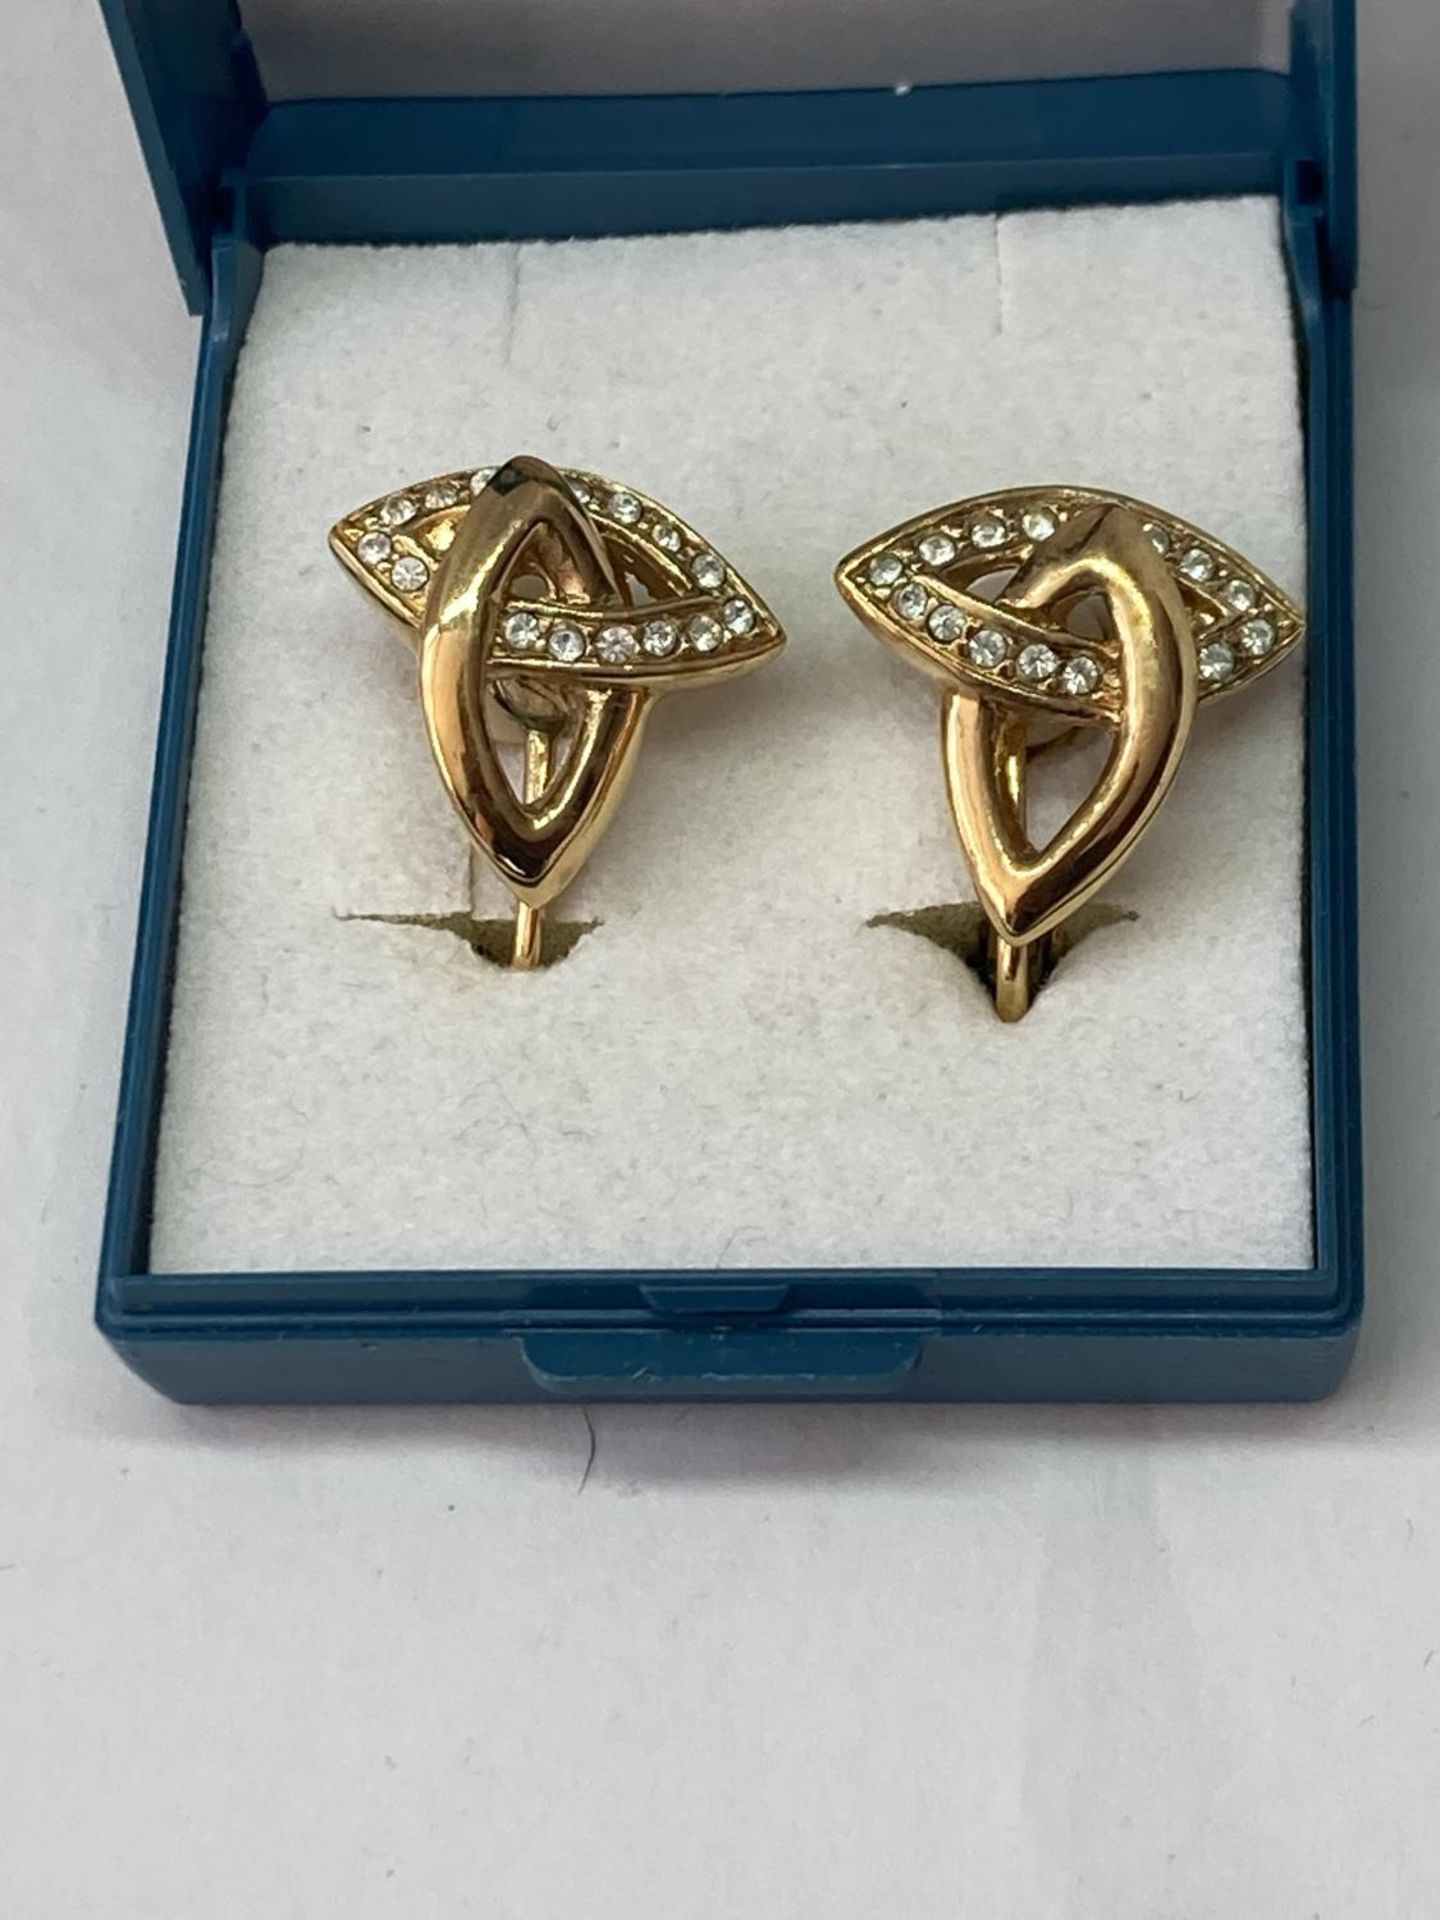 A PAIR OF VINTAGE ATTWOOD GOLD PLATED EARRINGS IN A PRESENTATION BOX - Image 2 of 8